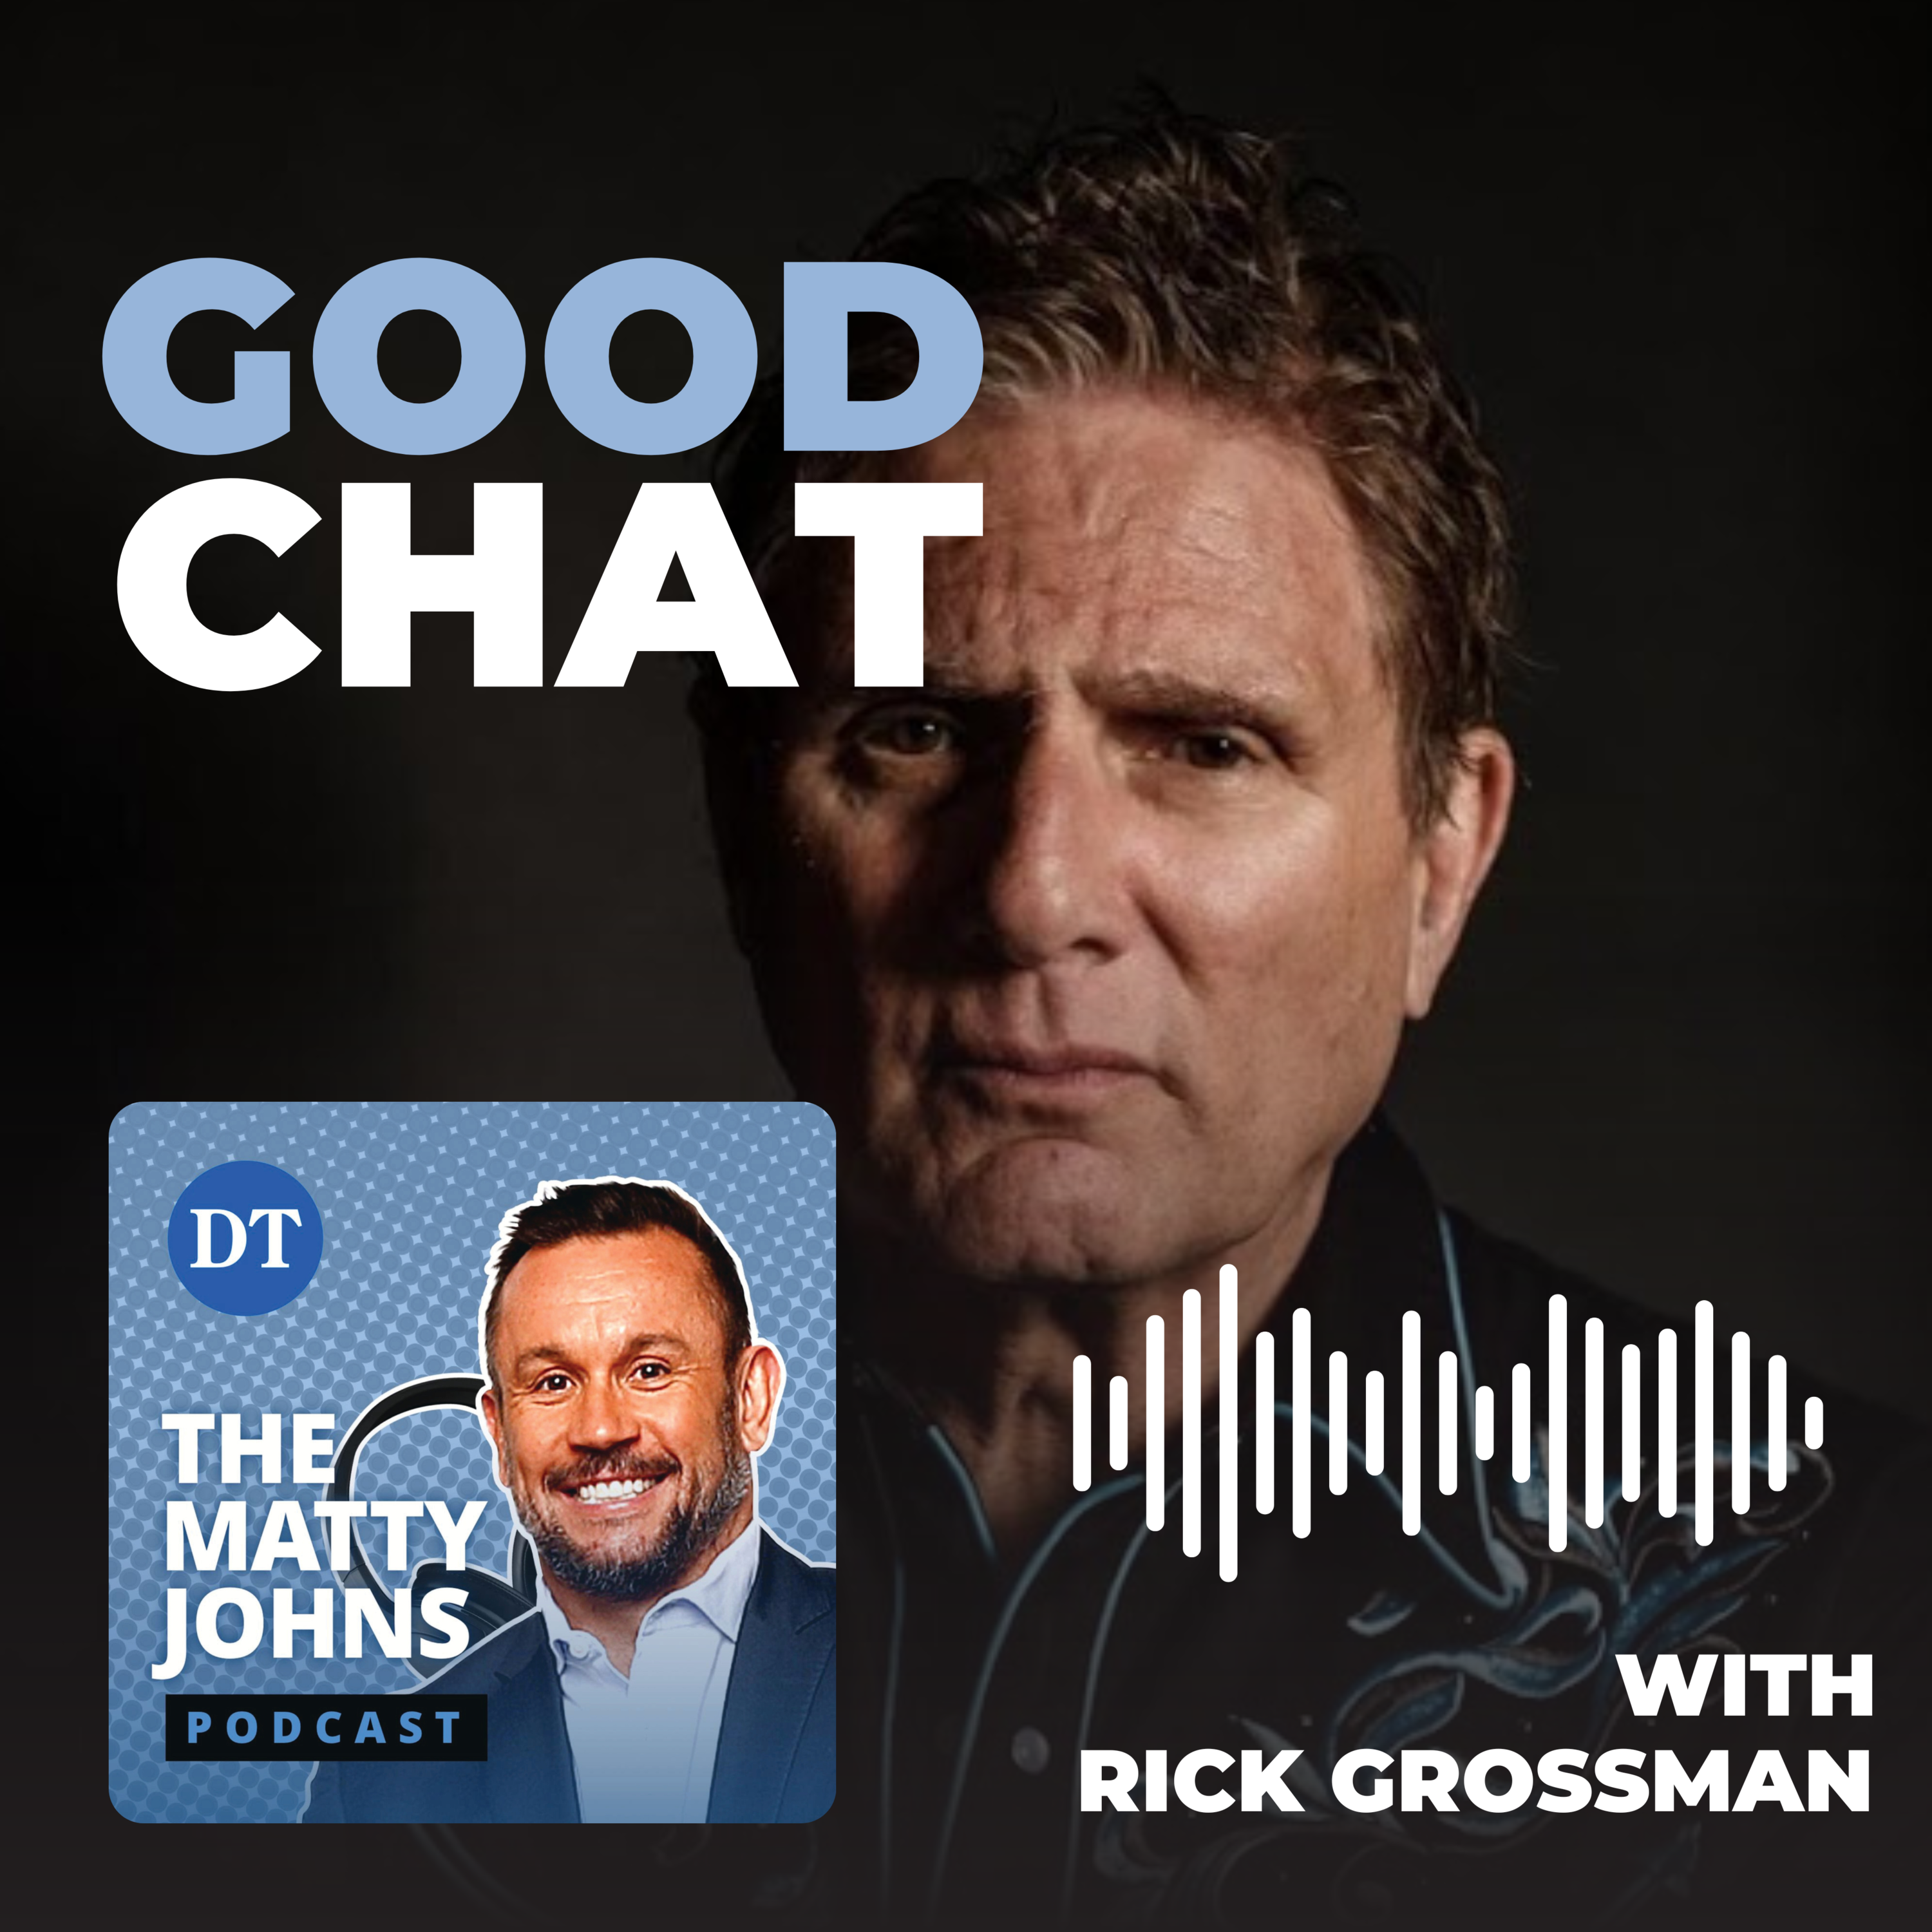 🎙Good Chat - Rick Grossman, a rock and roll kind of life....